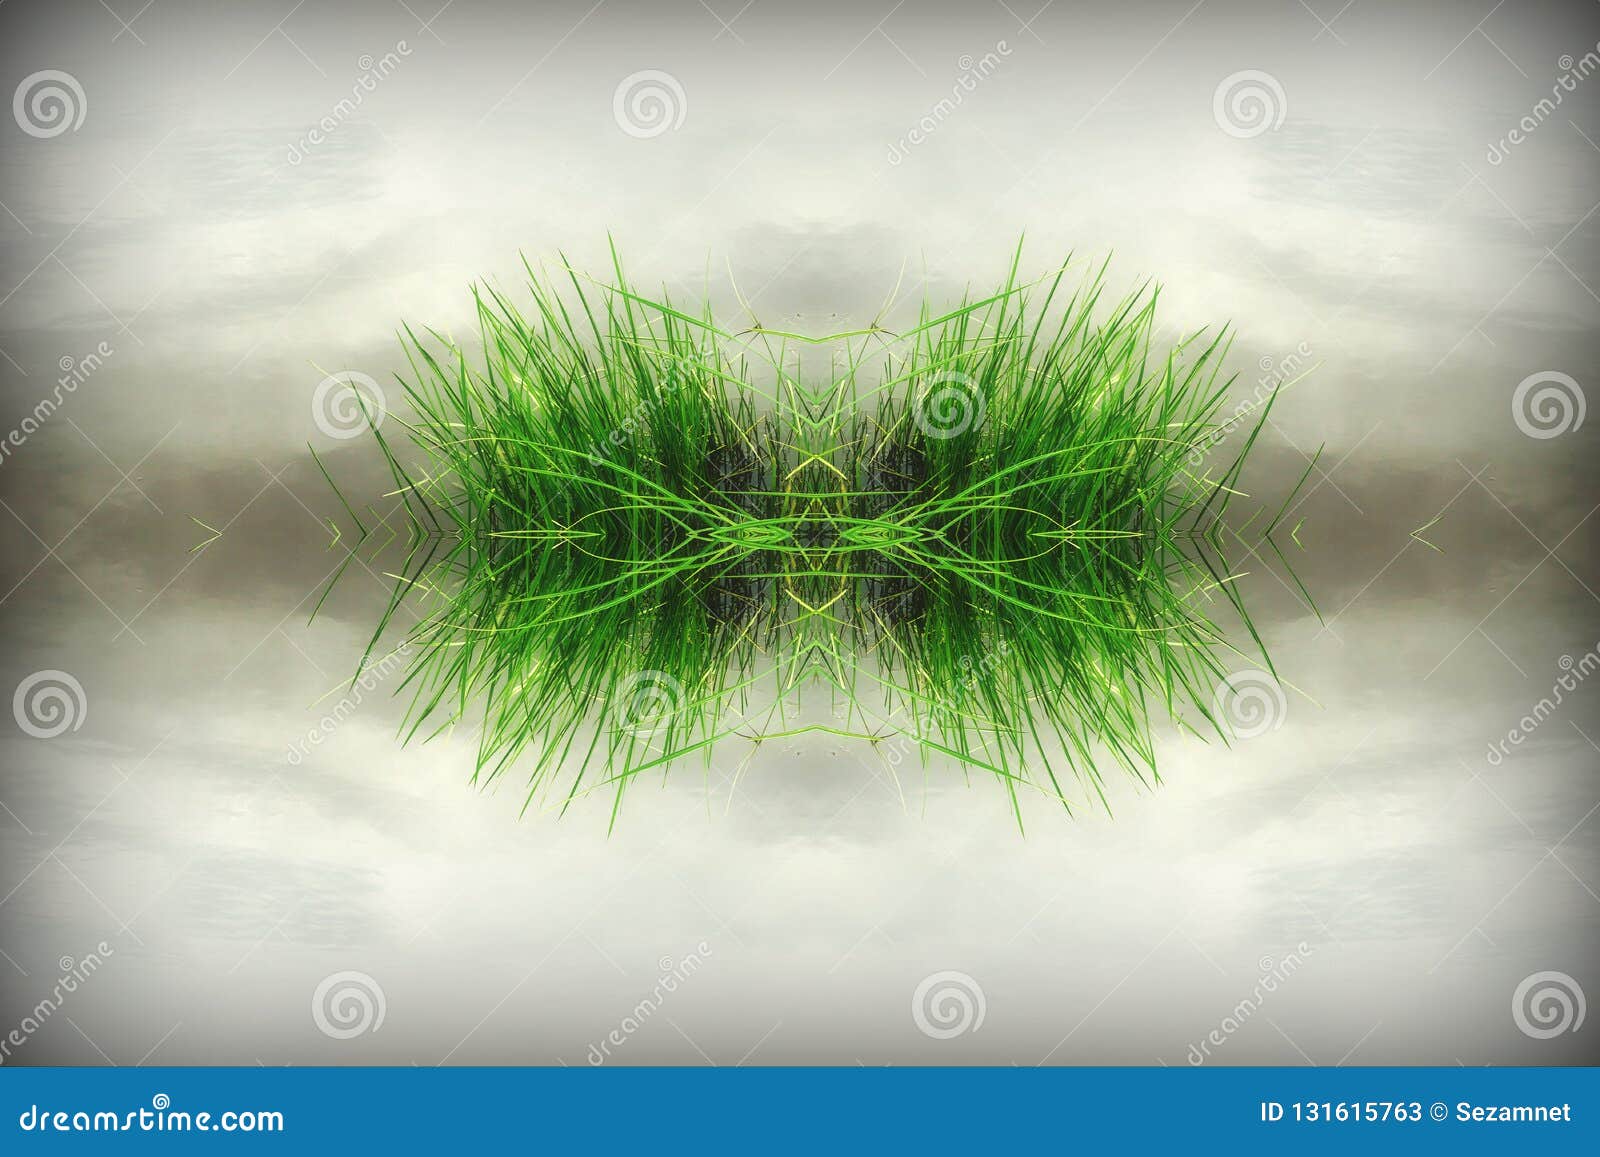 green island in the fog grass reflection in the water